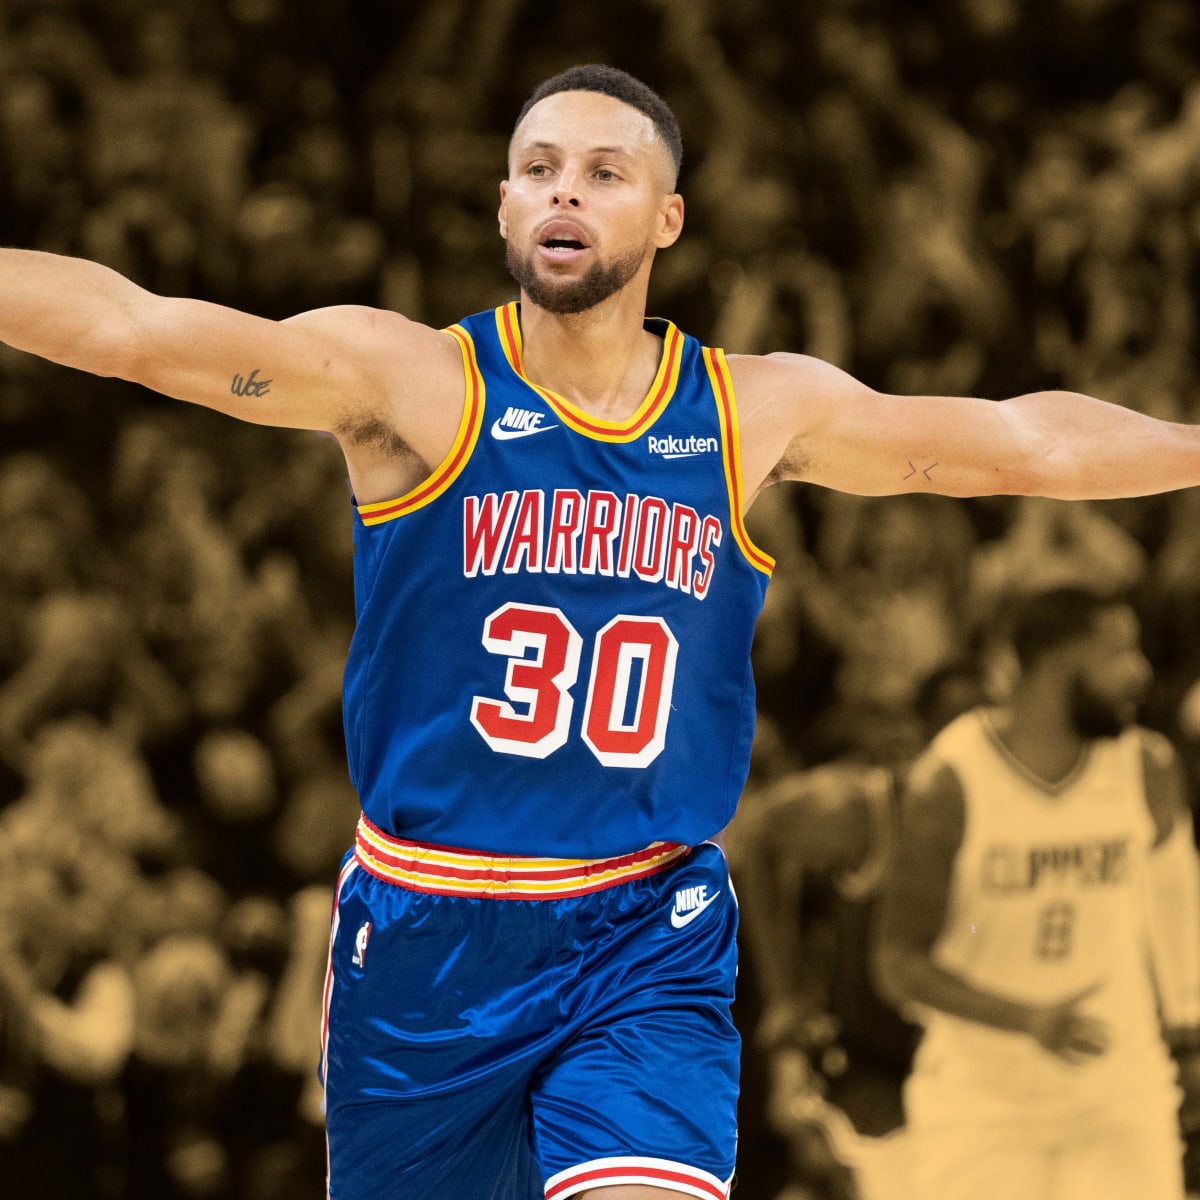 LeBron James and Stephen Curry are different kinds of NBA 'unselfish' stars  